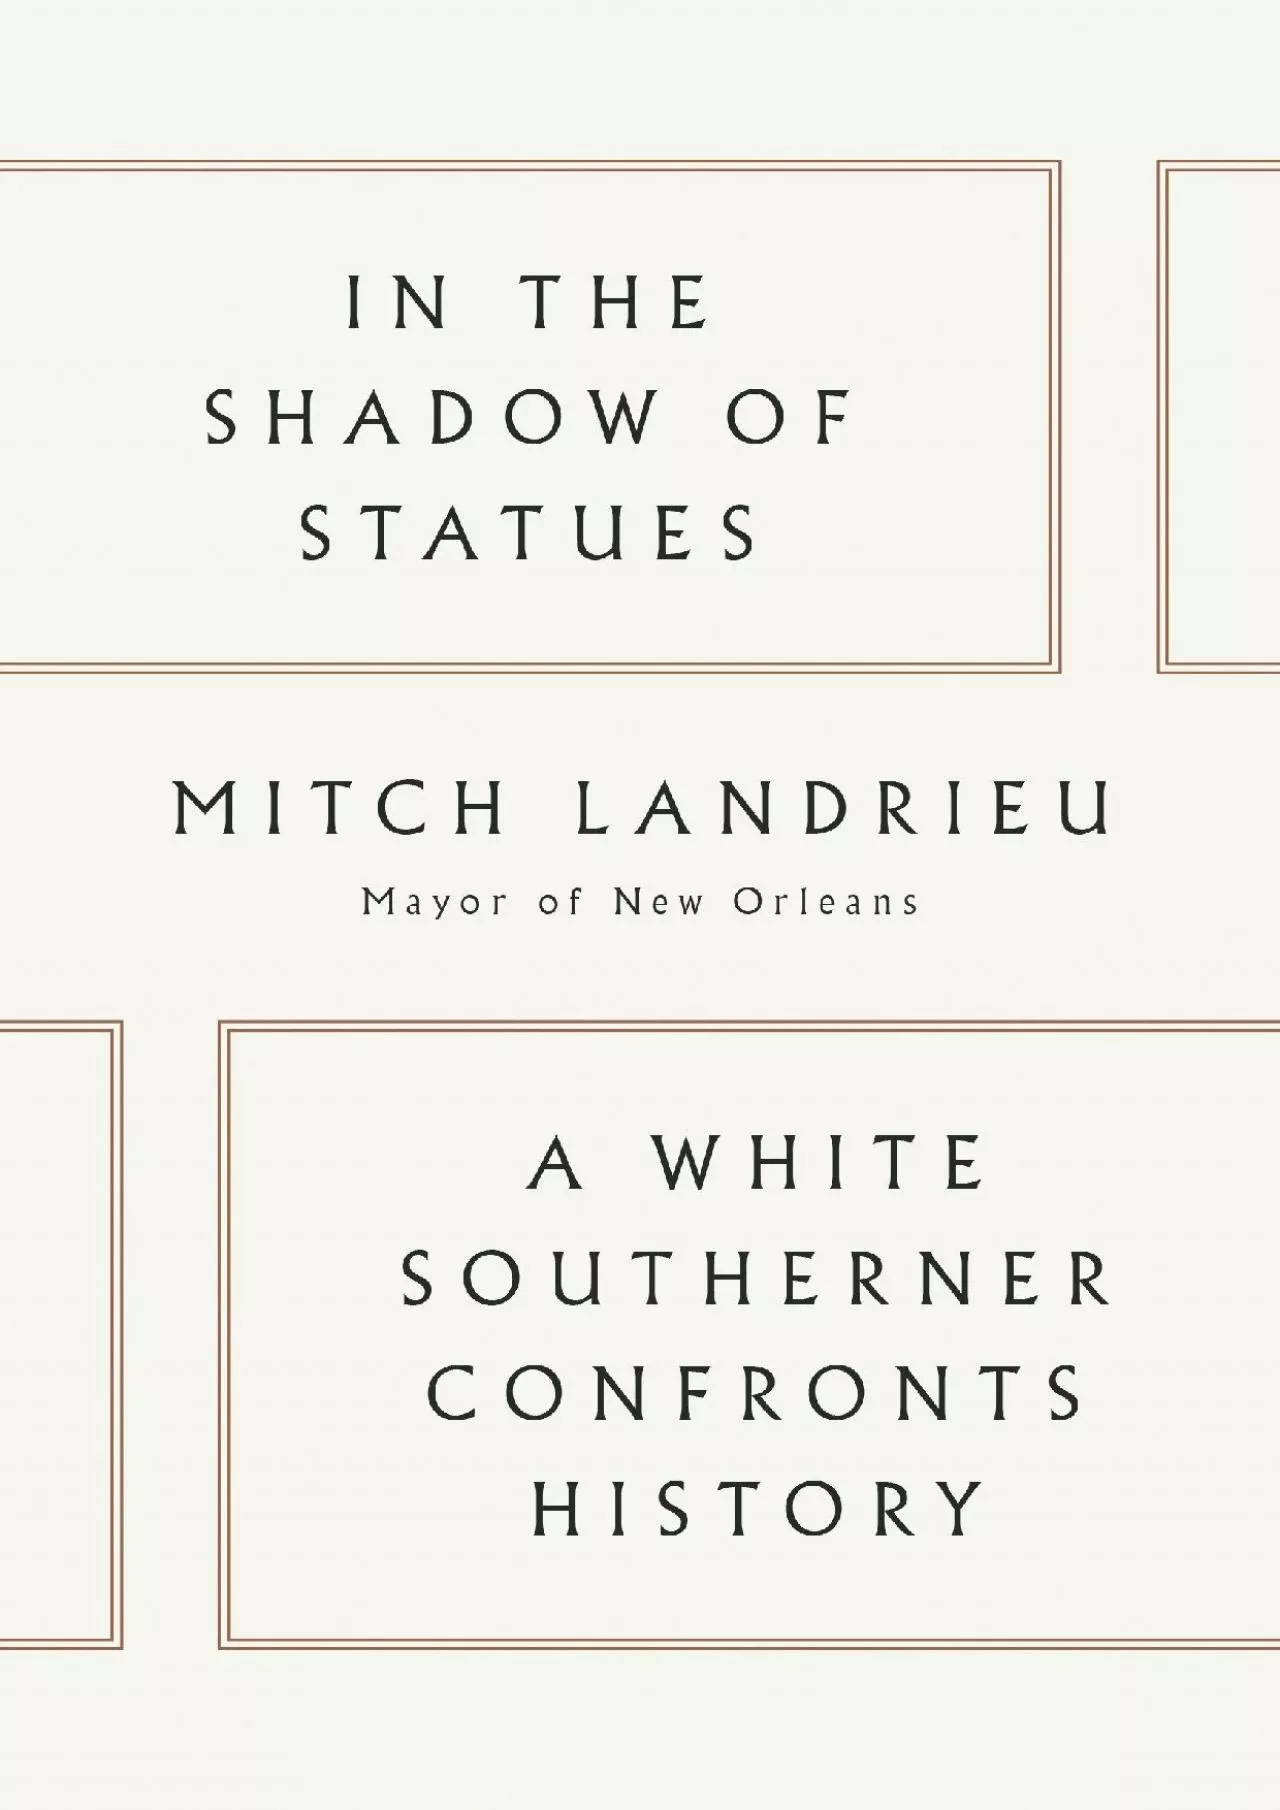 (DOWNLOAD)-In the Shadow of Statues: A White Southerner Confronts History